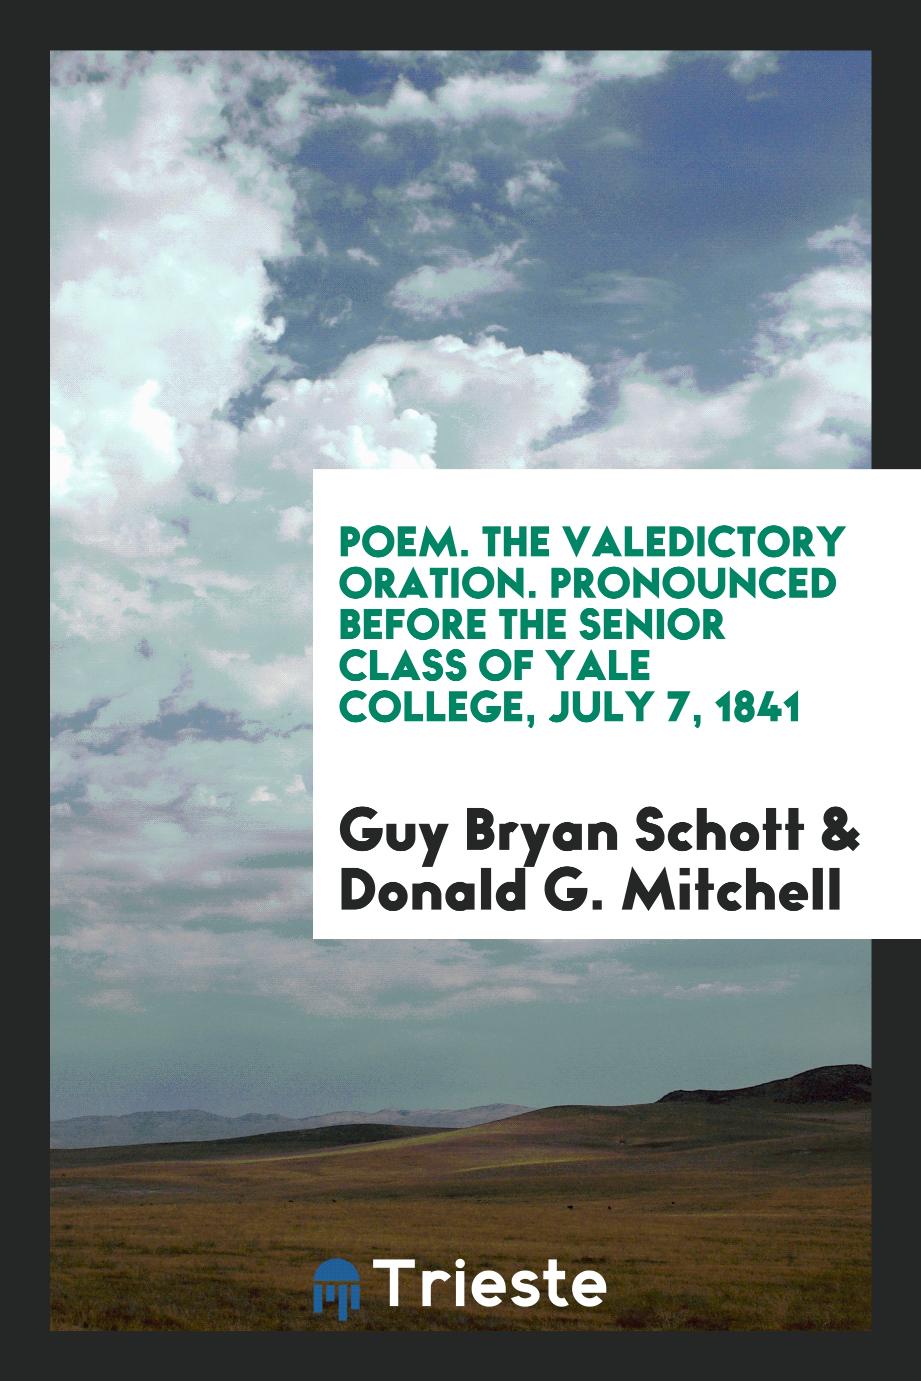 Poem. The valedictory oration. Pronounced before the senior class of Yale college, July 7, 1841